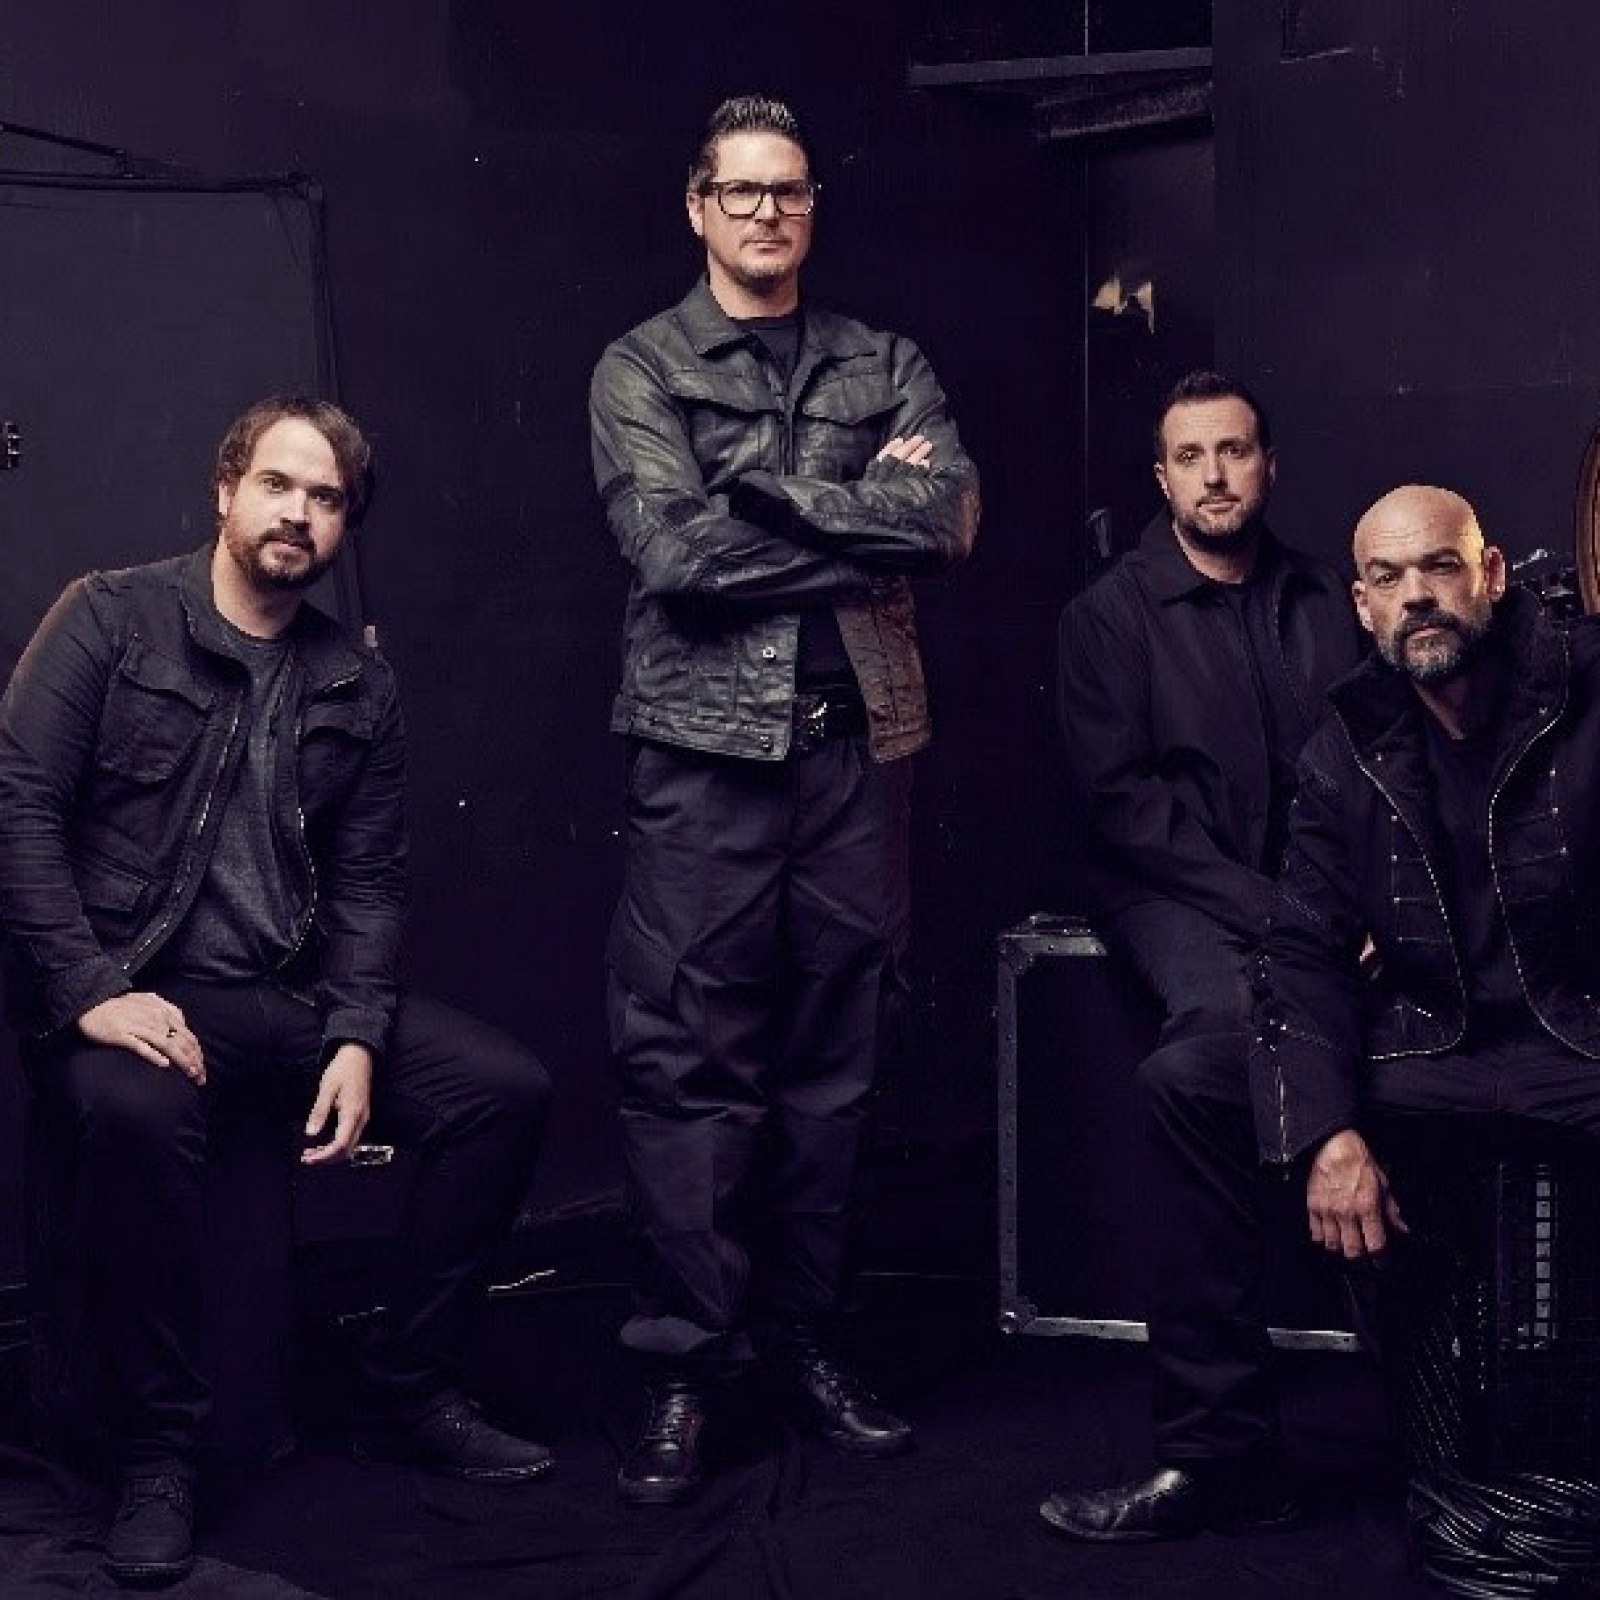 review of ghost adventures halloween special 2020 Ghost Adventures Crew To Investigate Real Conjuring House In 2019 Halloween Special review of ghost adventures halloween special 2020